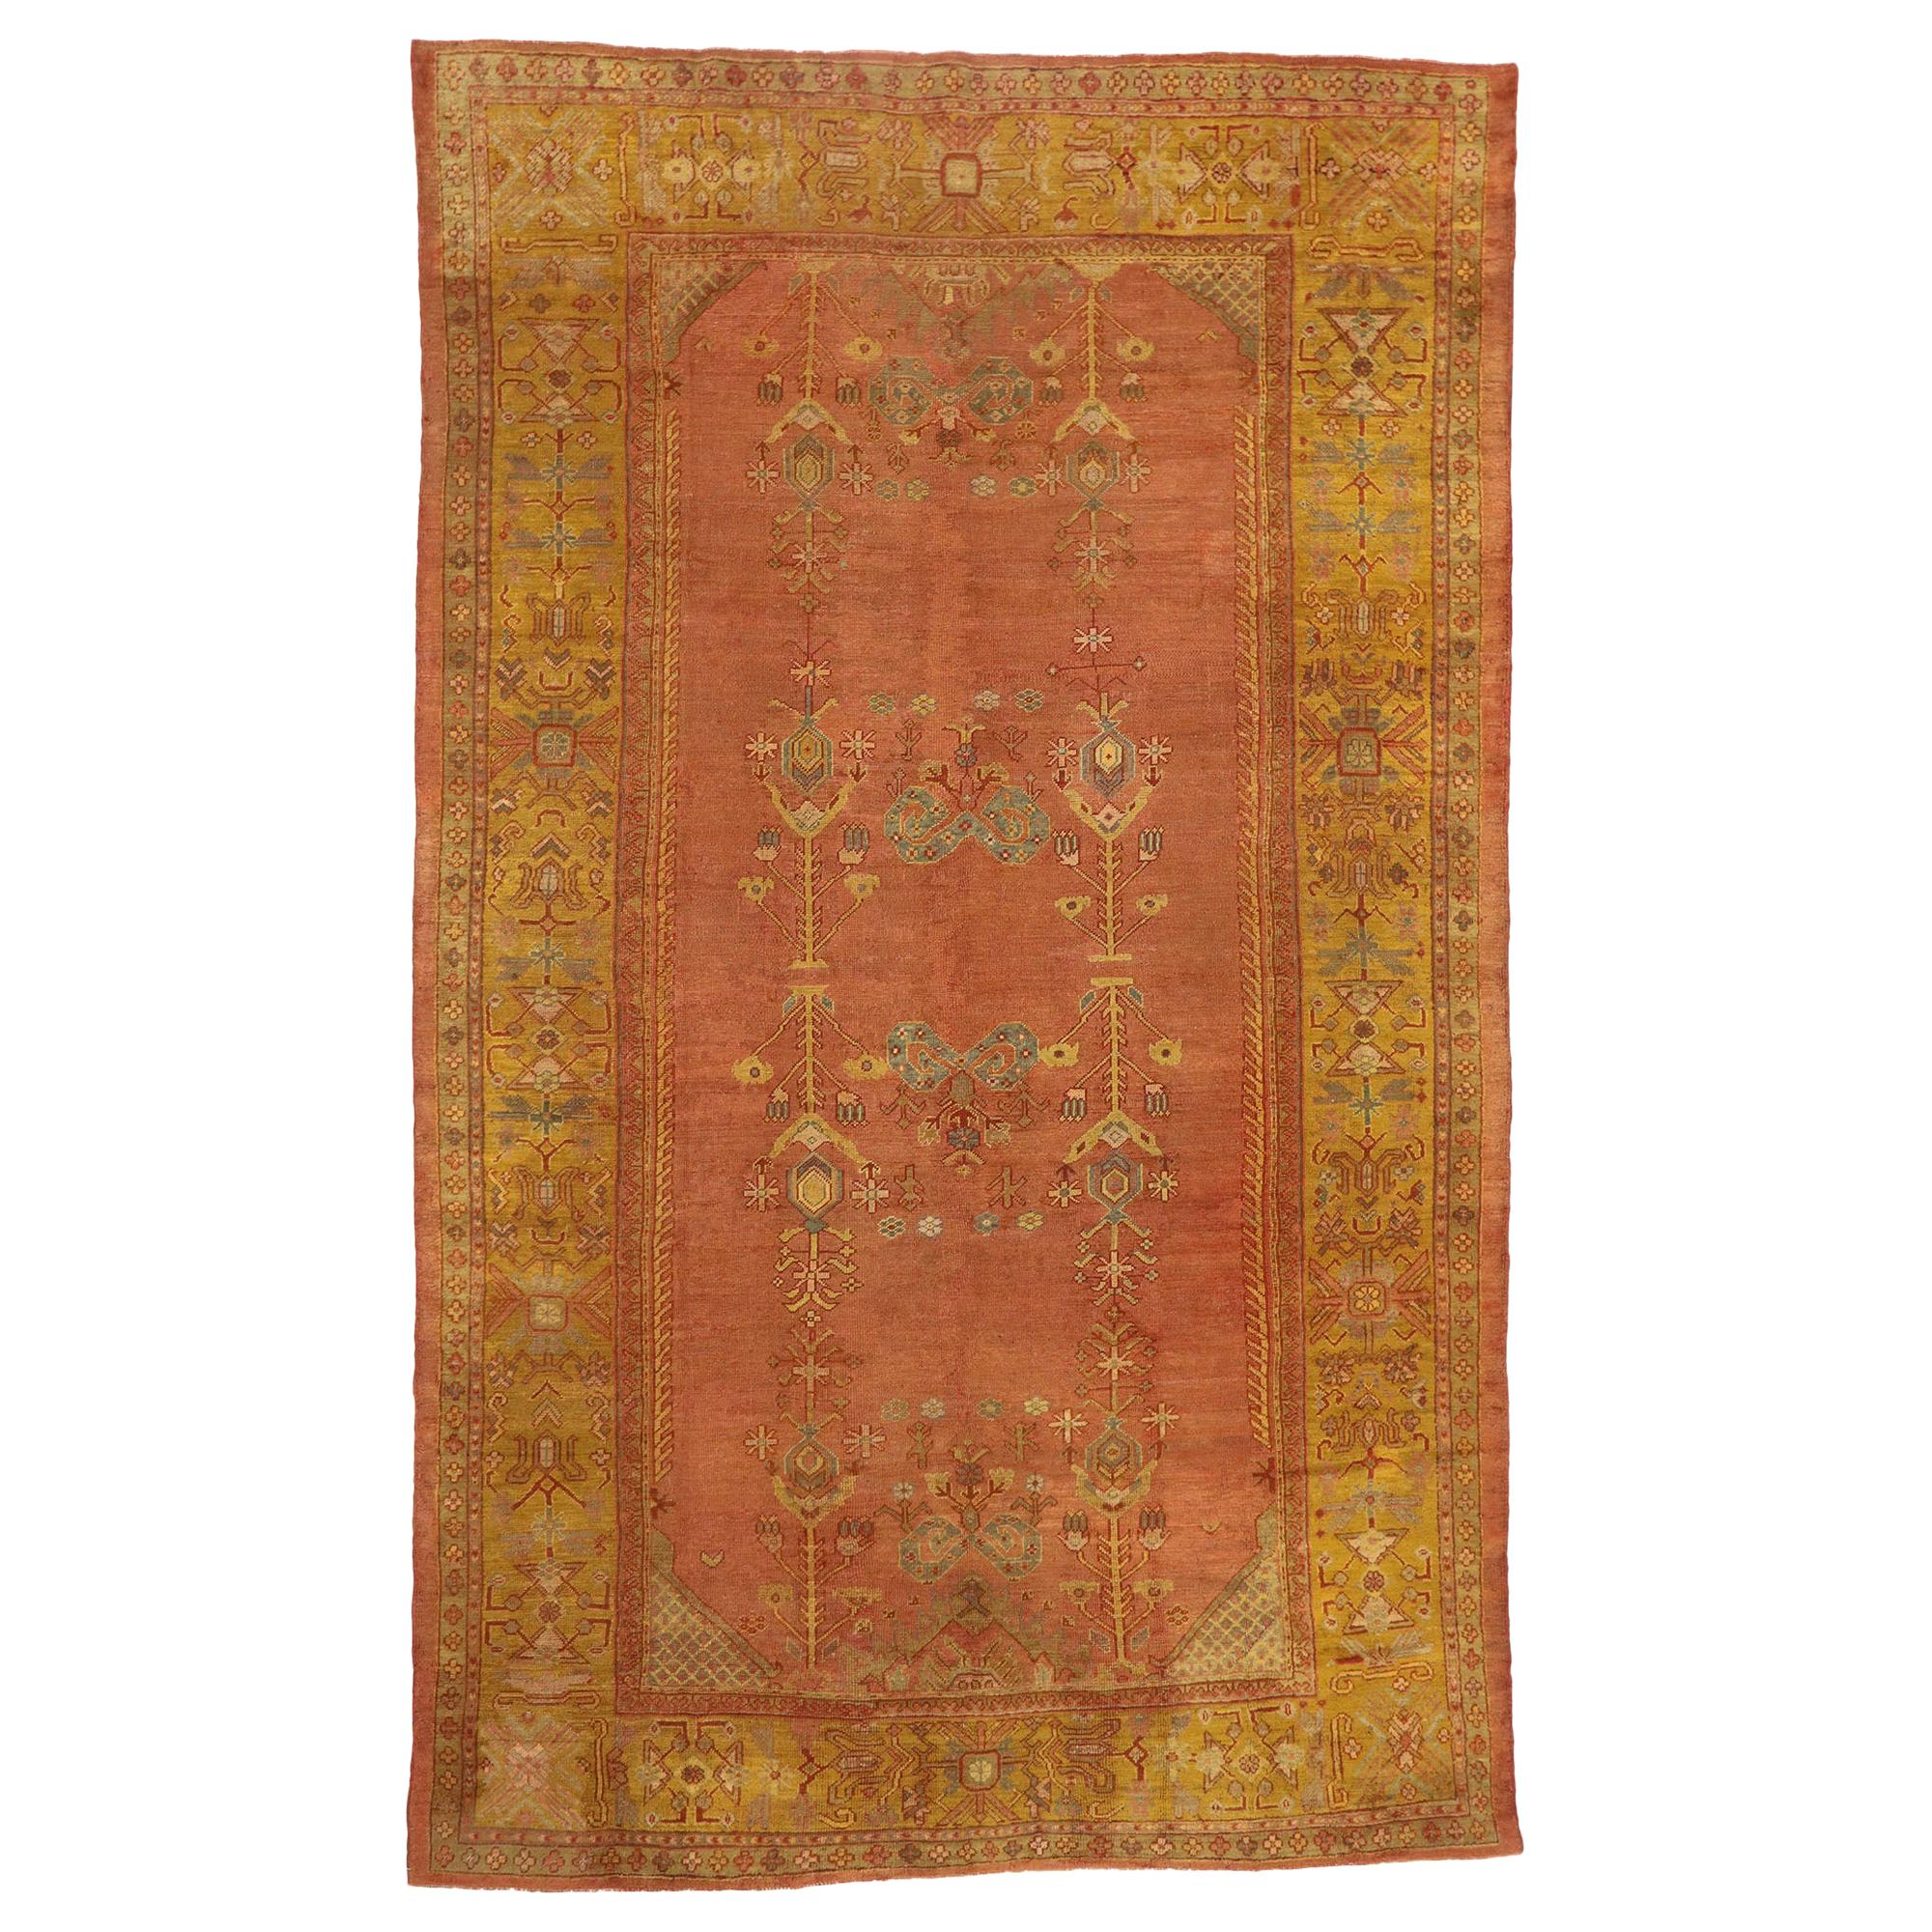 Antique Turkish Oushak Rug with Rustic Arts & Crafts Style